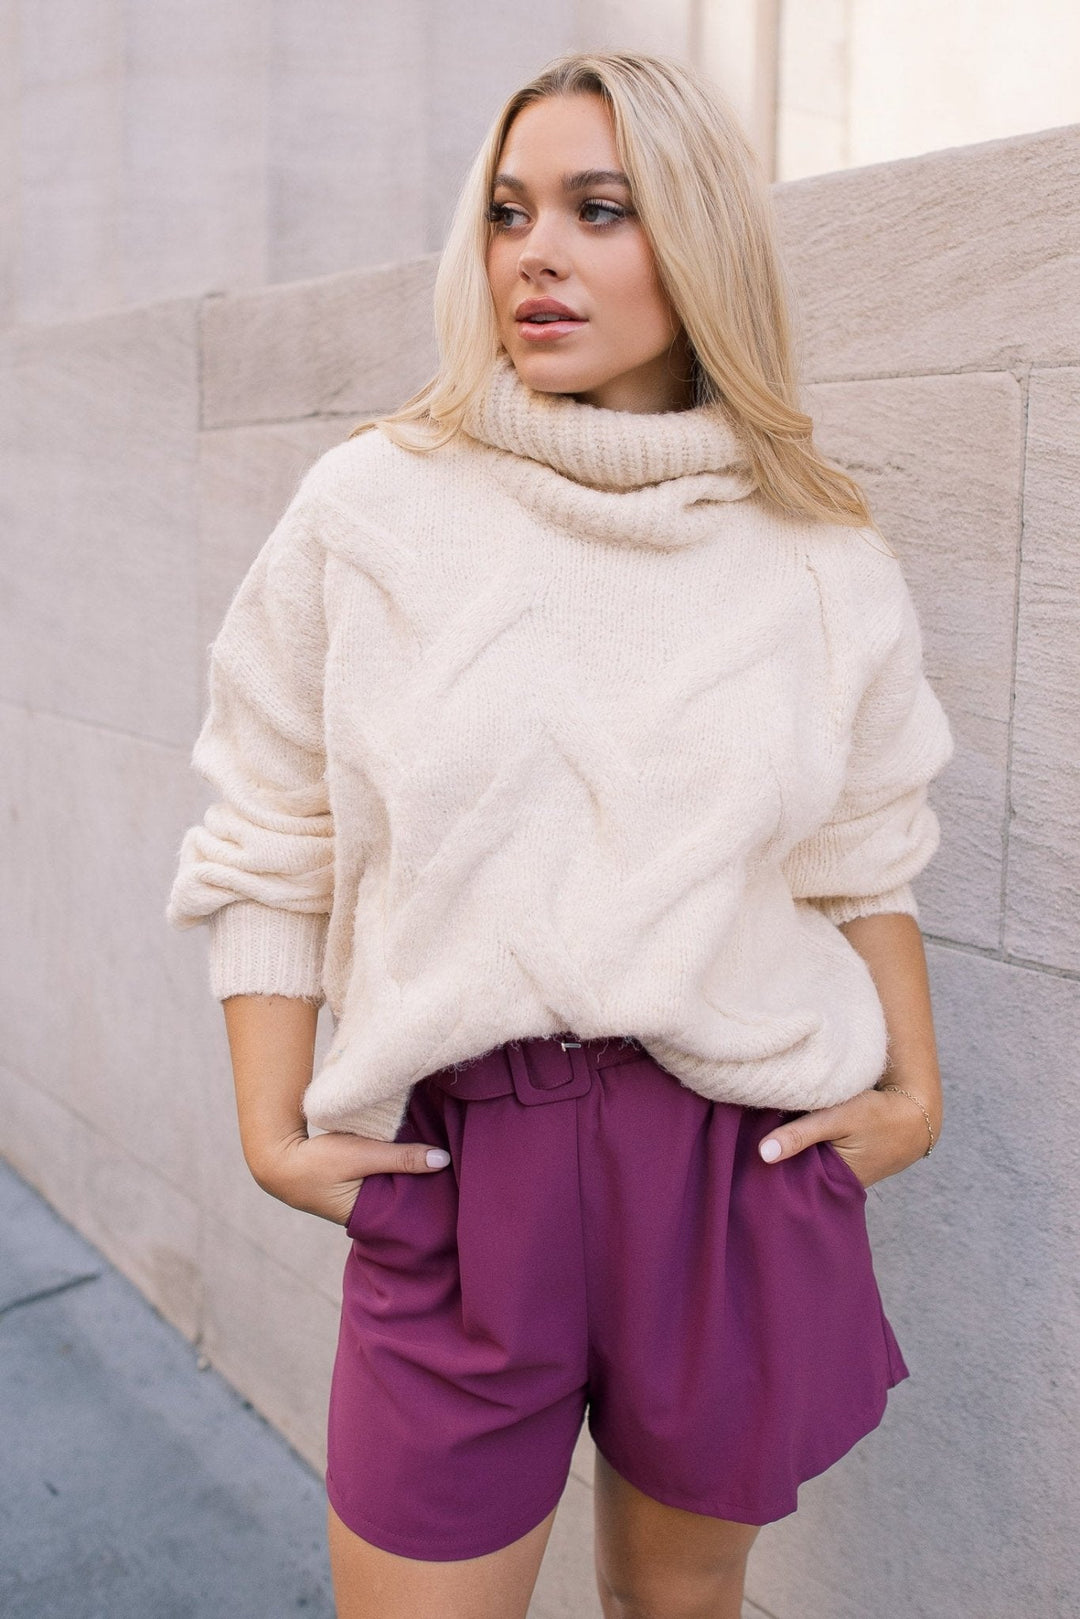 Elvie Cable Knit Sweater - JO+CO